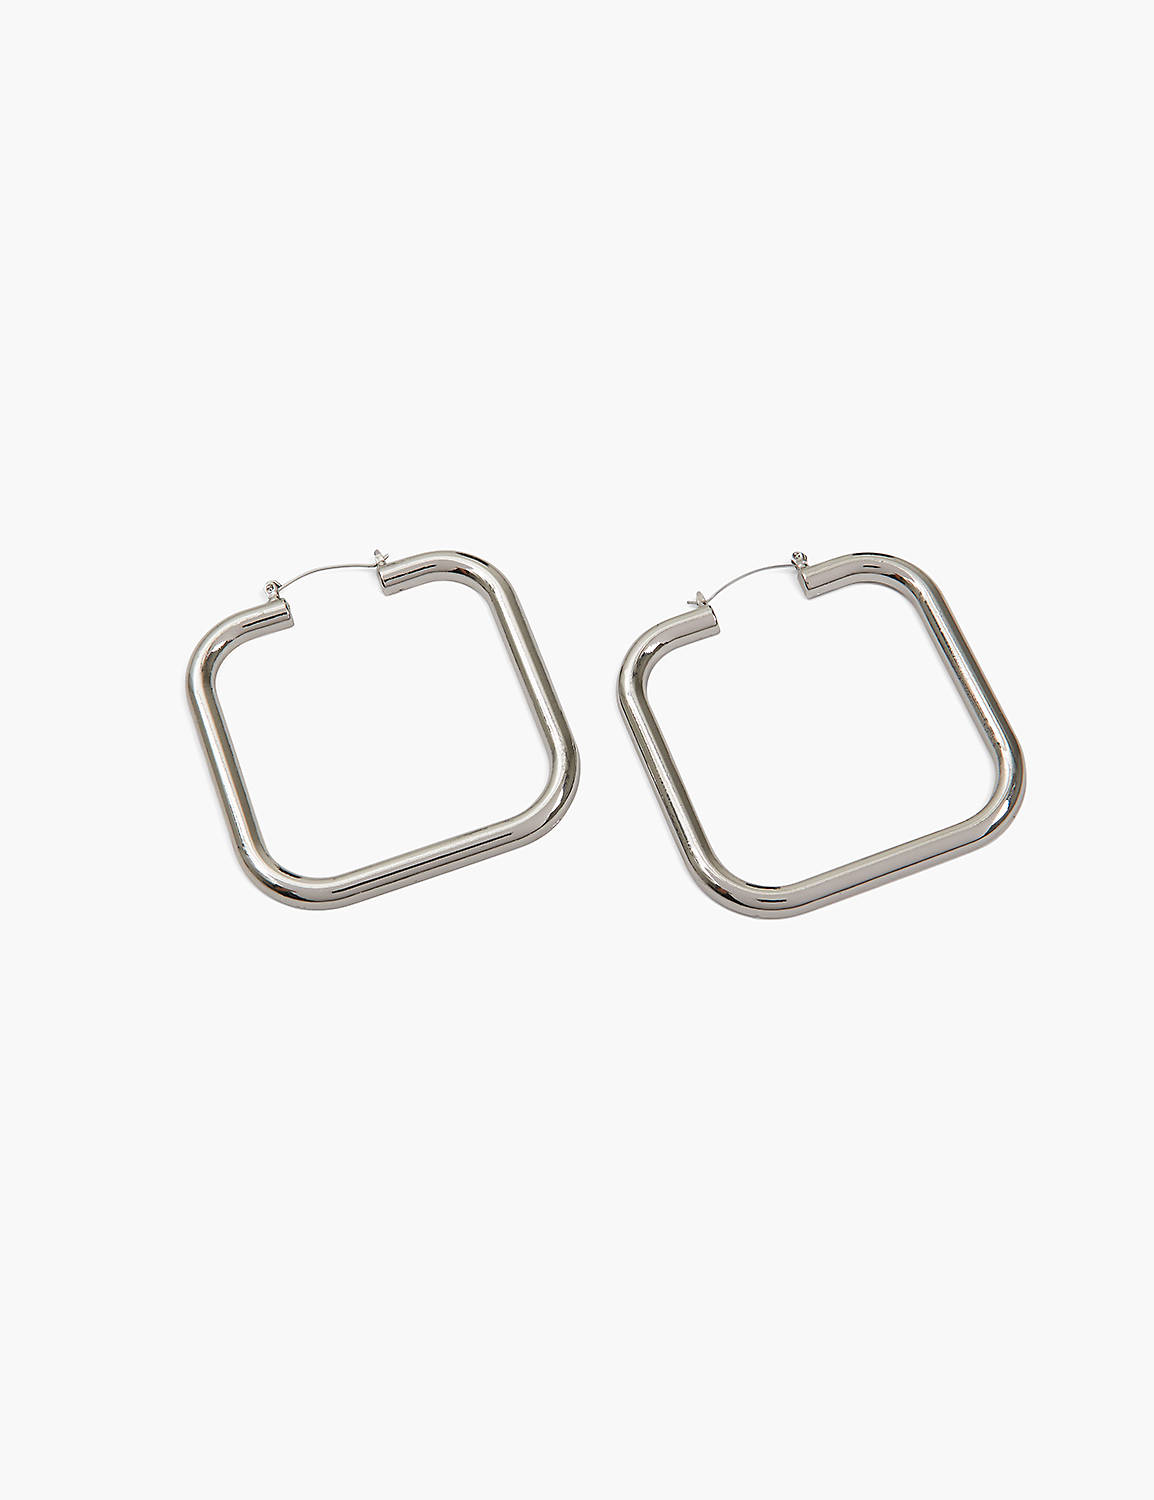 Oversized Square Hoop Earrings Product Image 1